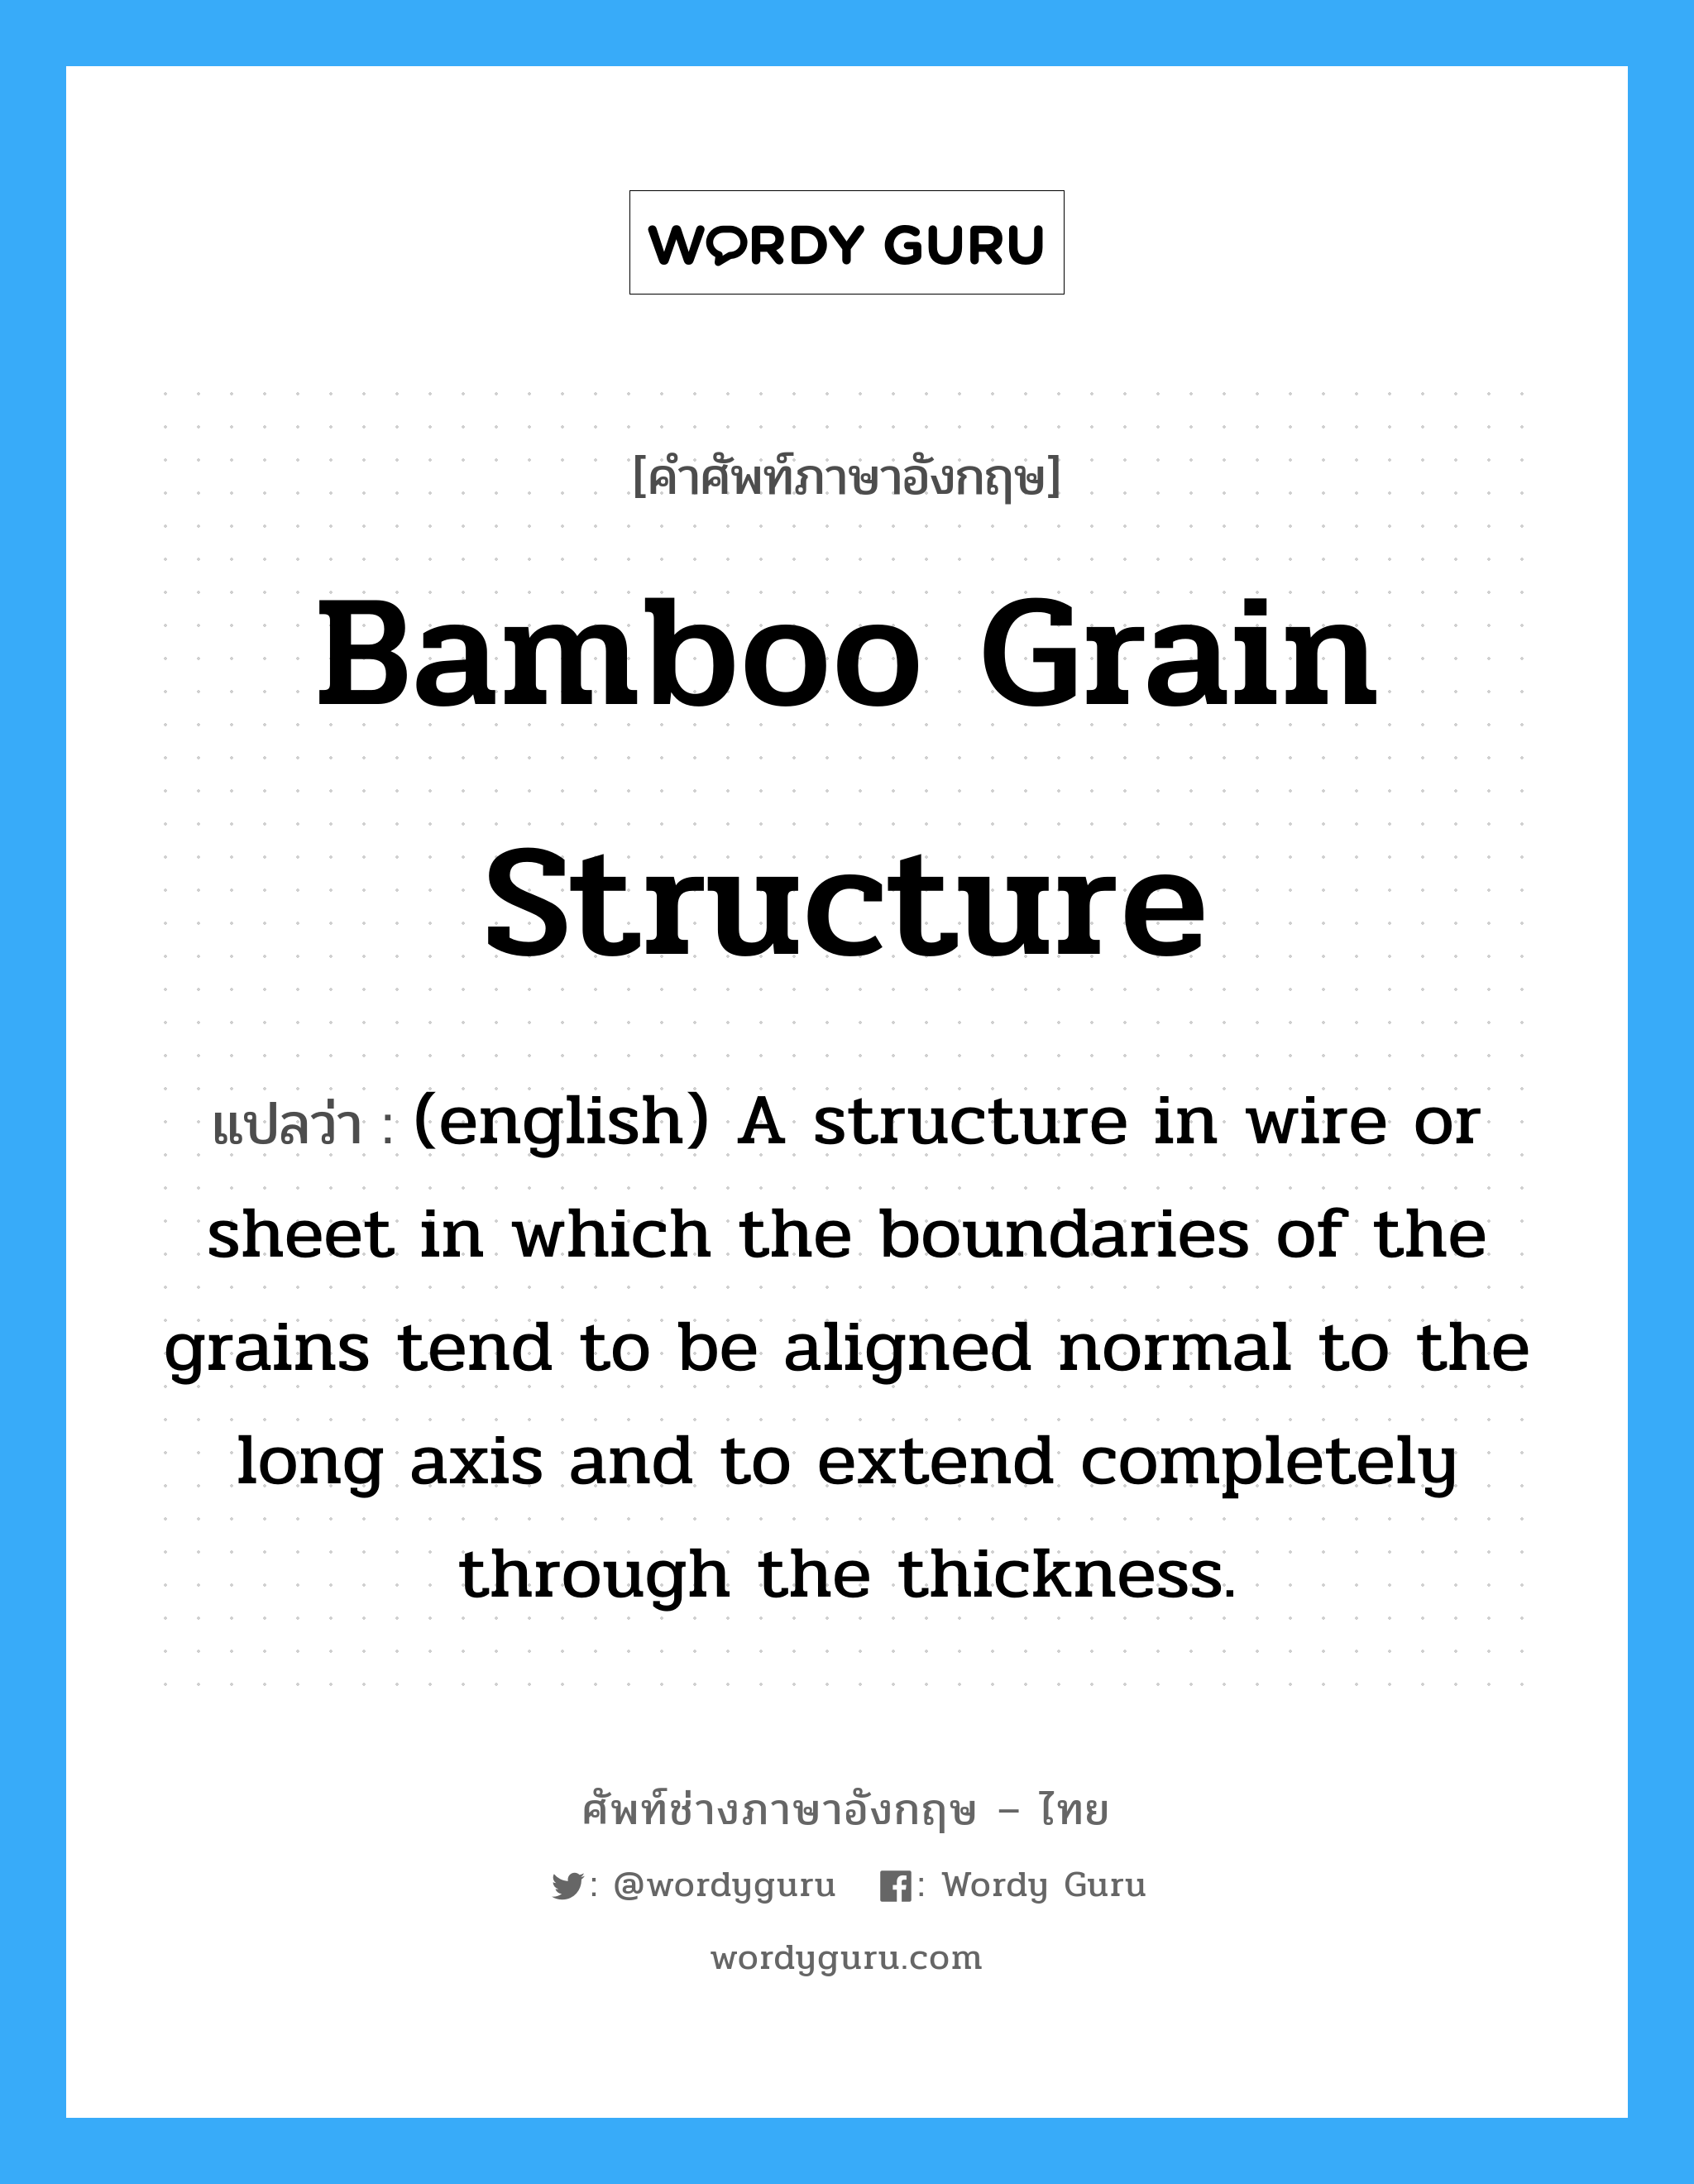 Bamboo Grain Structure แปลว่า?, คำศัพท์ช่างภาษาอังกฤษ - ไทย Bamboo Grain Structure คำศัพท์ภาษาอังกฤษ Bamboo Grain Structure แปลว่า (english) A structure in wire or sheet in which the boundaries of the grains tend to be aligned normal to the long axis and to extend completely through the thickness.